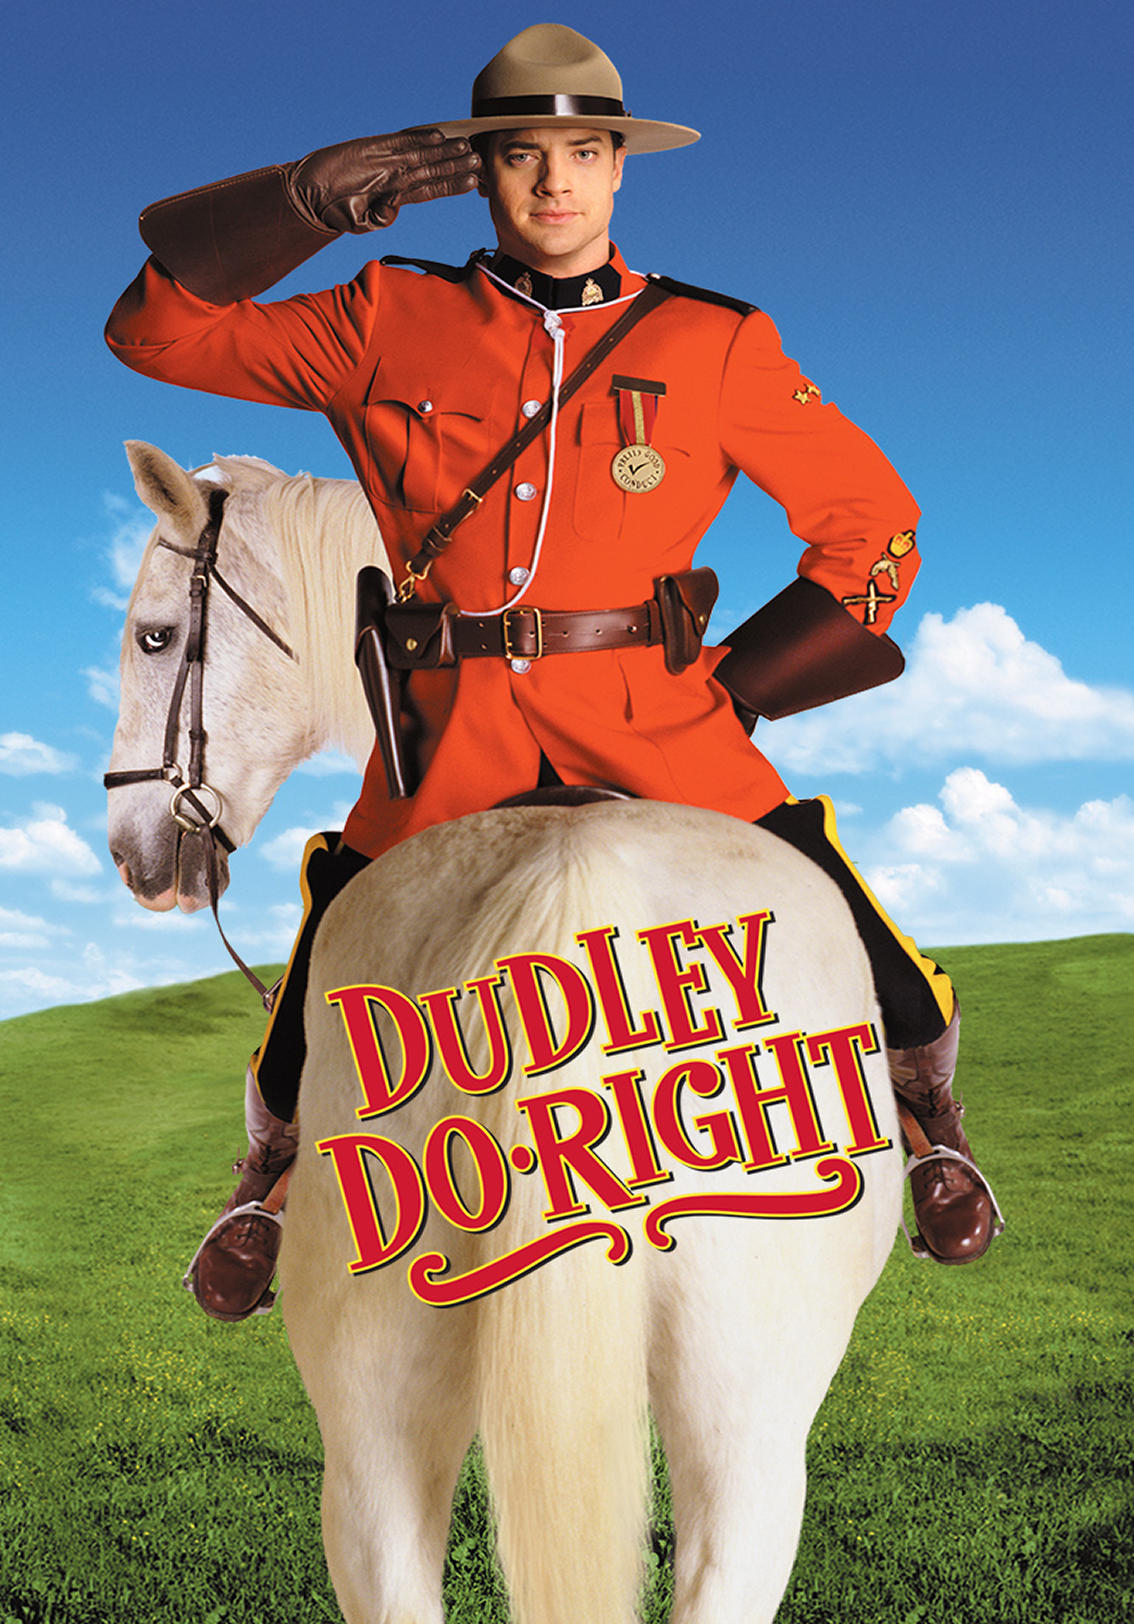 Dudley Do-Right.